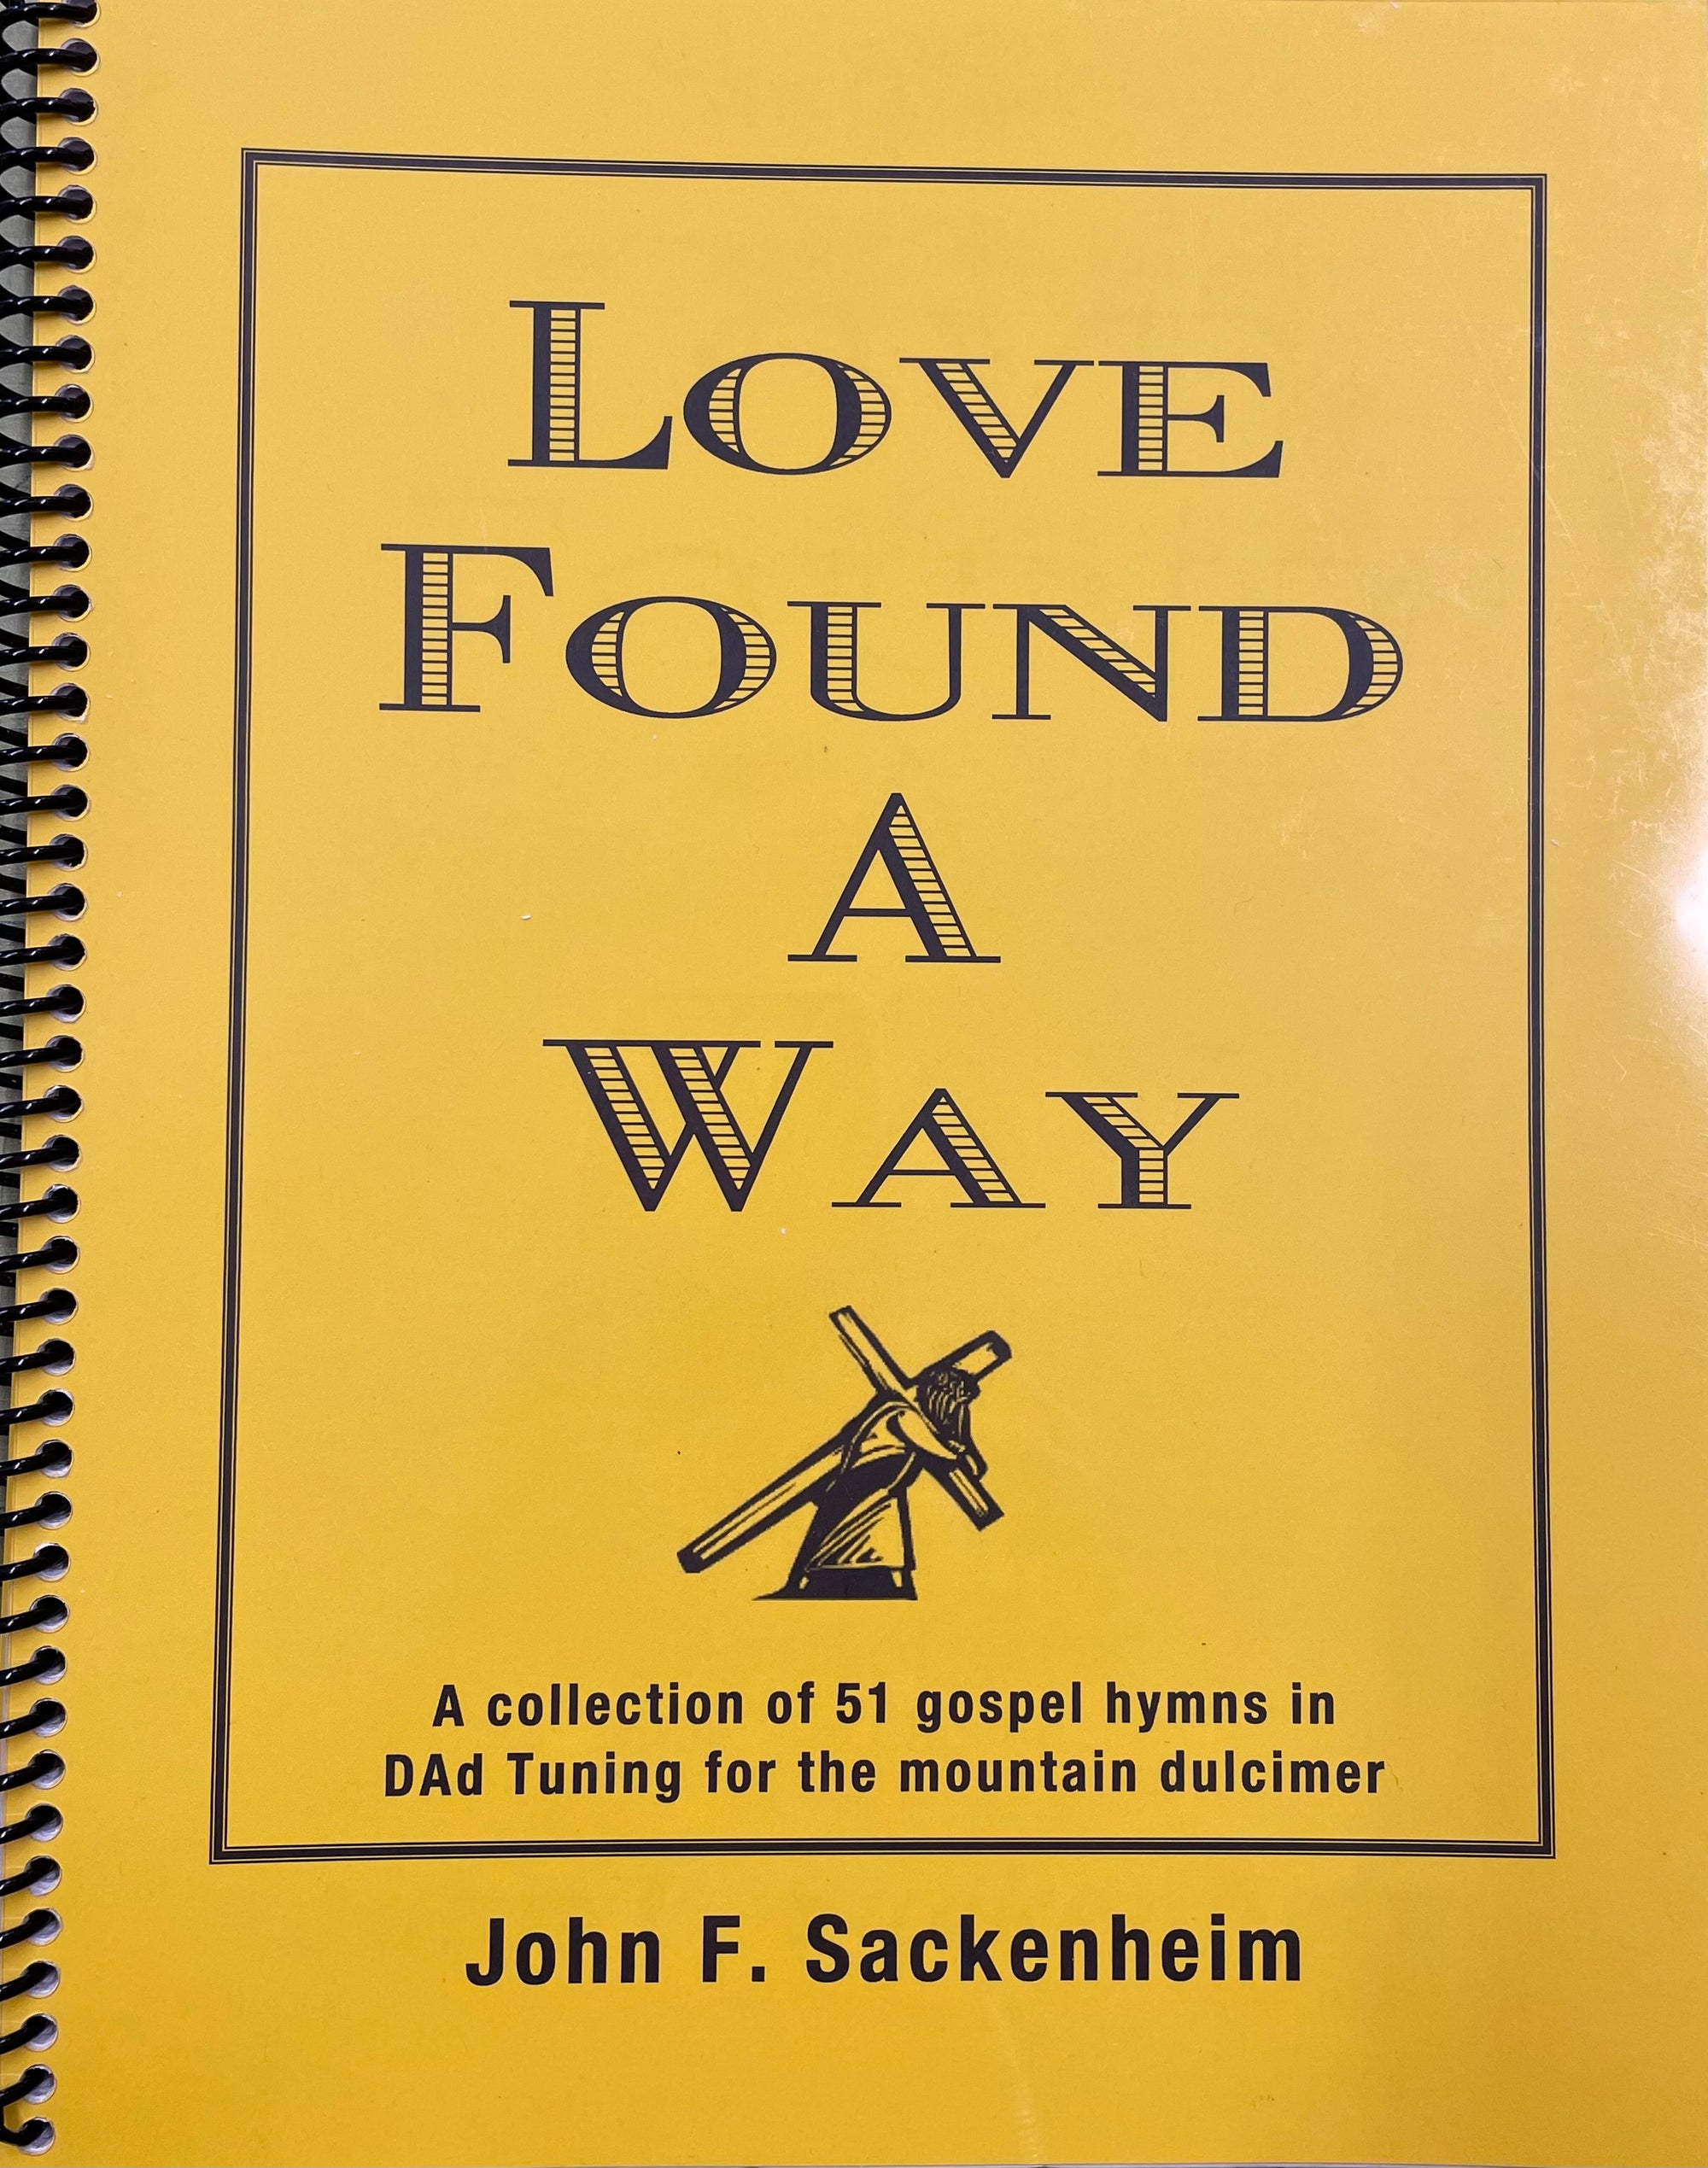 A yellow spiral-bound hymns book titled "Love Found a Way by John Sackenheim", featuring a collection of 51 gospel hymns.